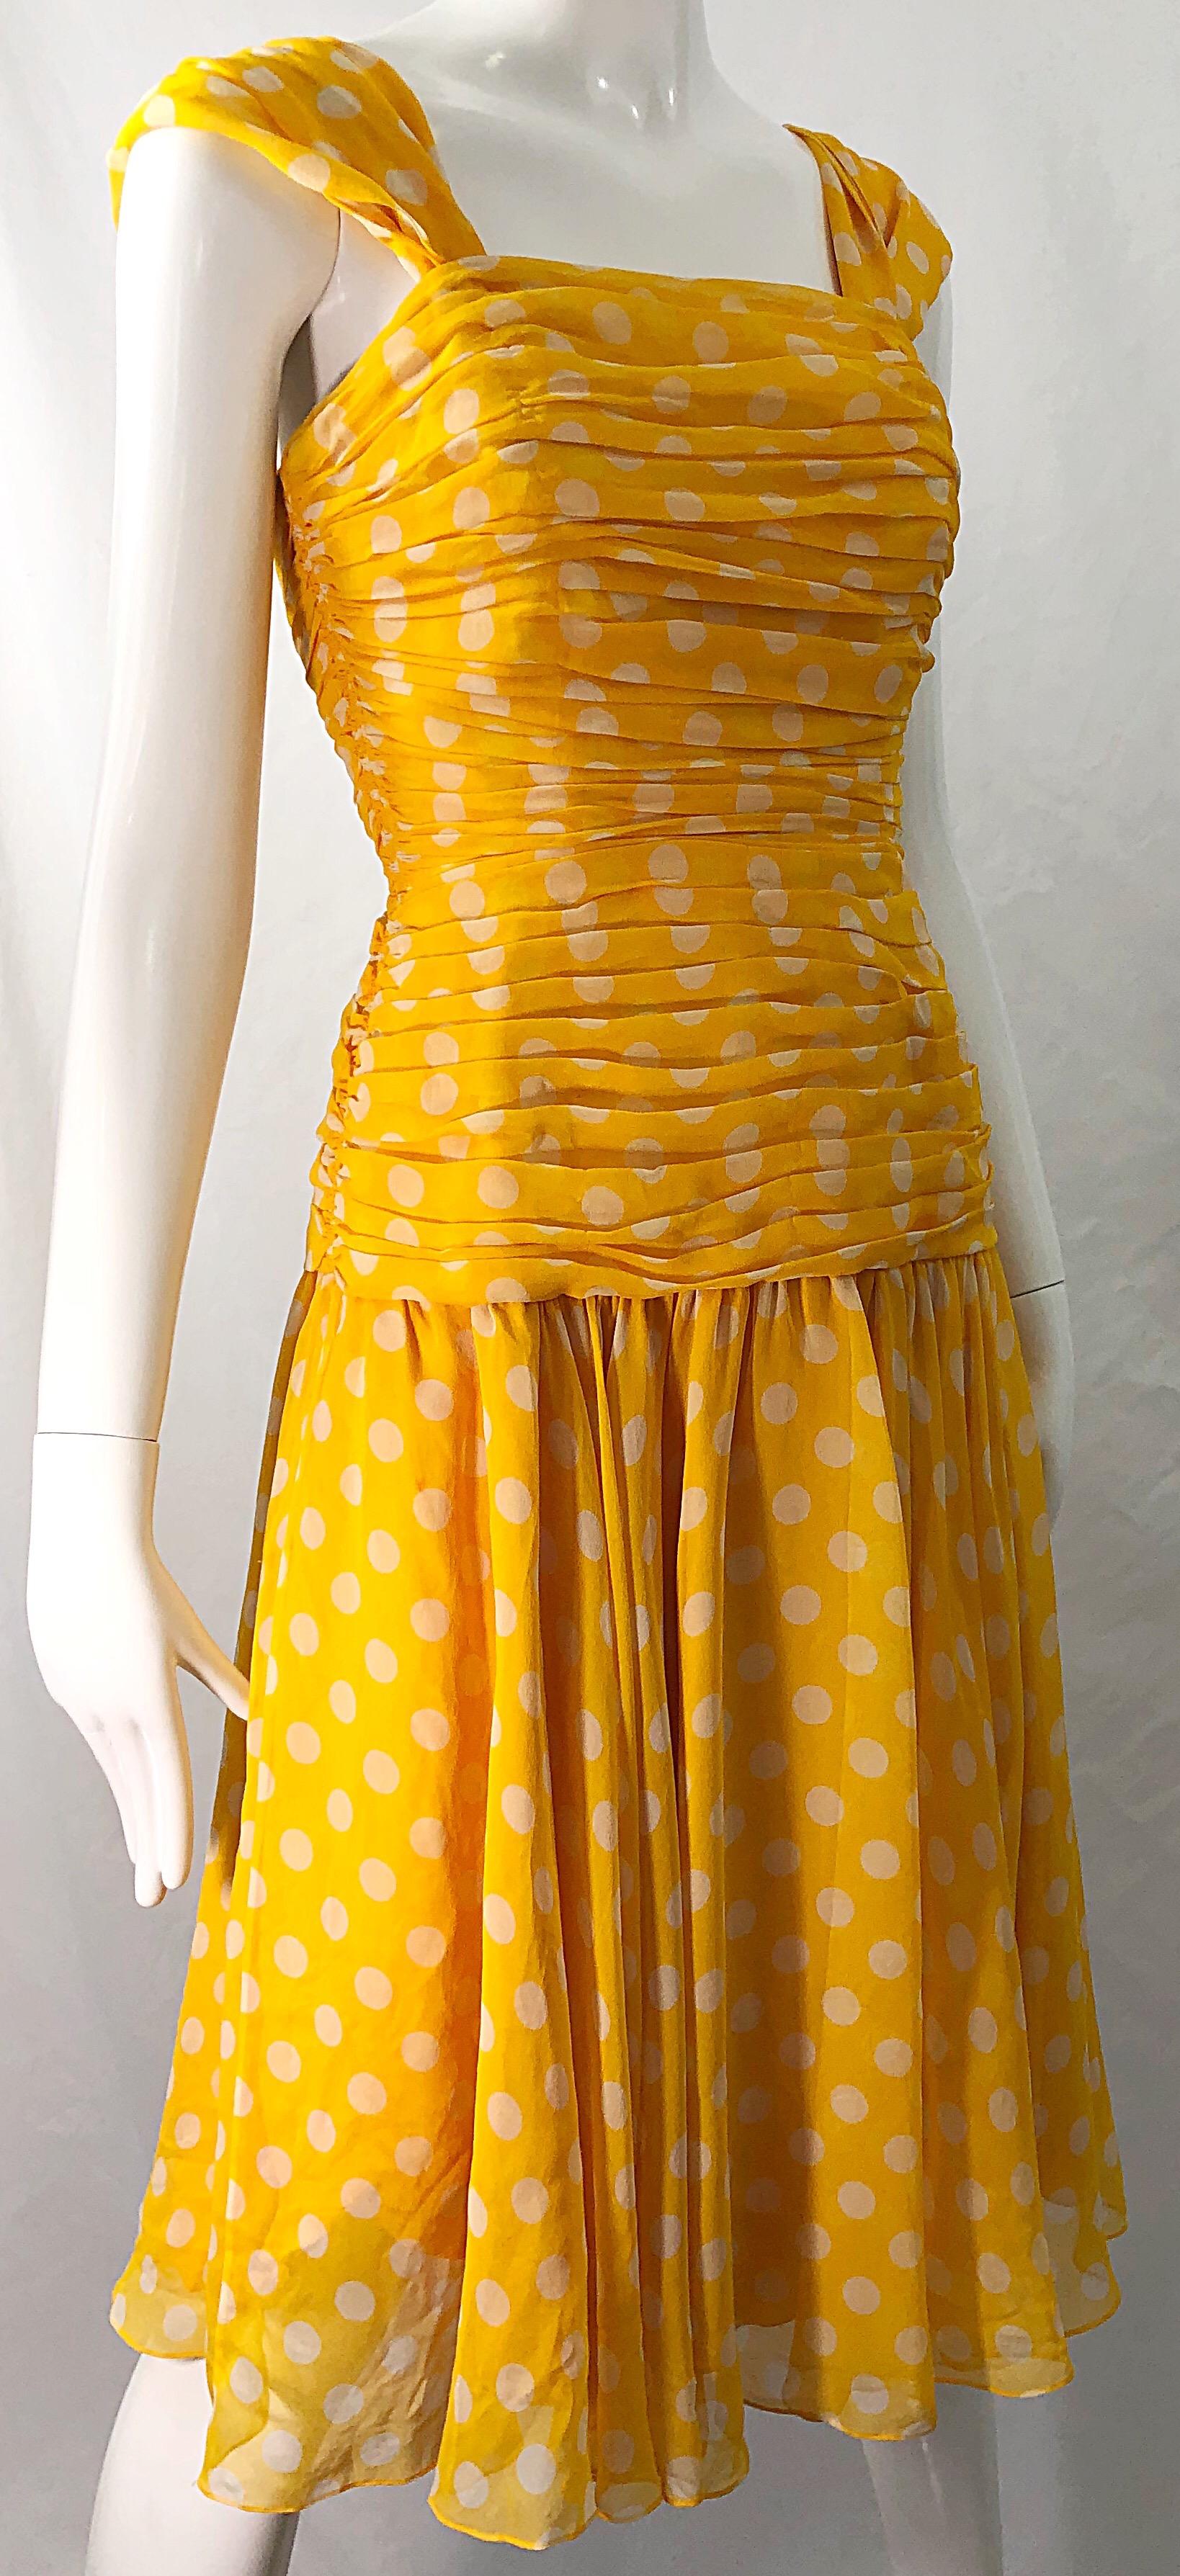 Adele Simpson 1980s Size 4 Yellow White Silk Chiffon Polka Dot Vintage 80s Dress In Excellent Condition For Sale In San Diego, CA